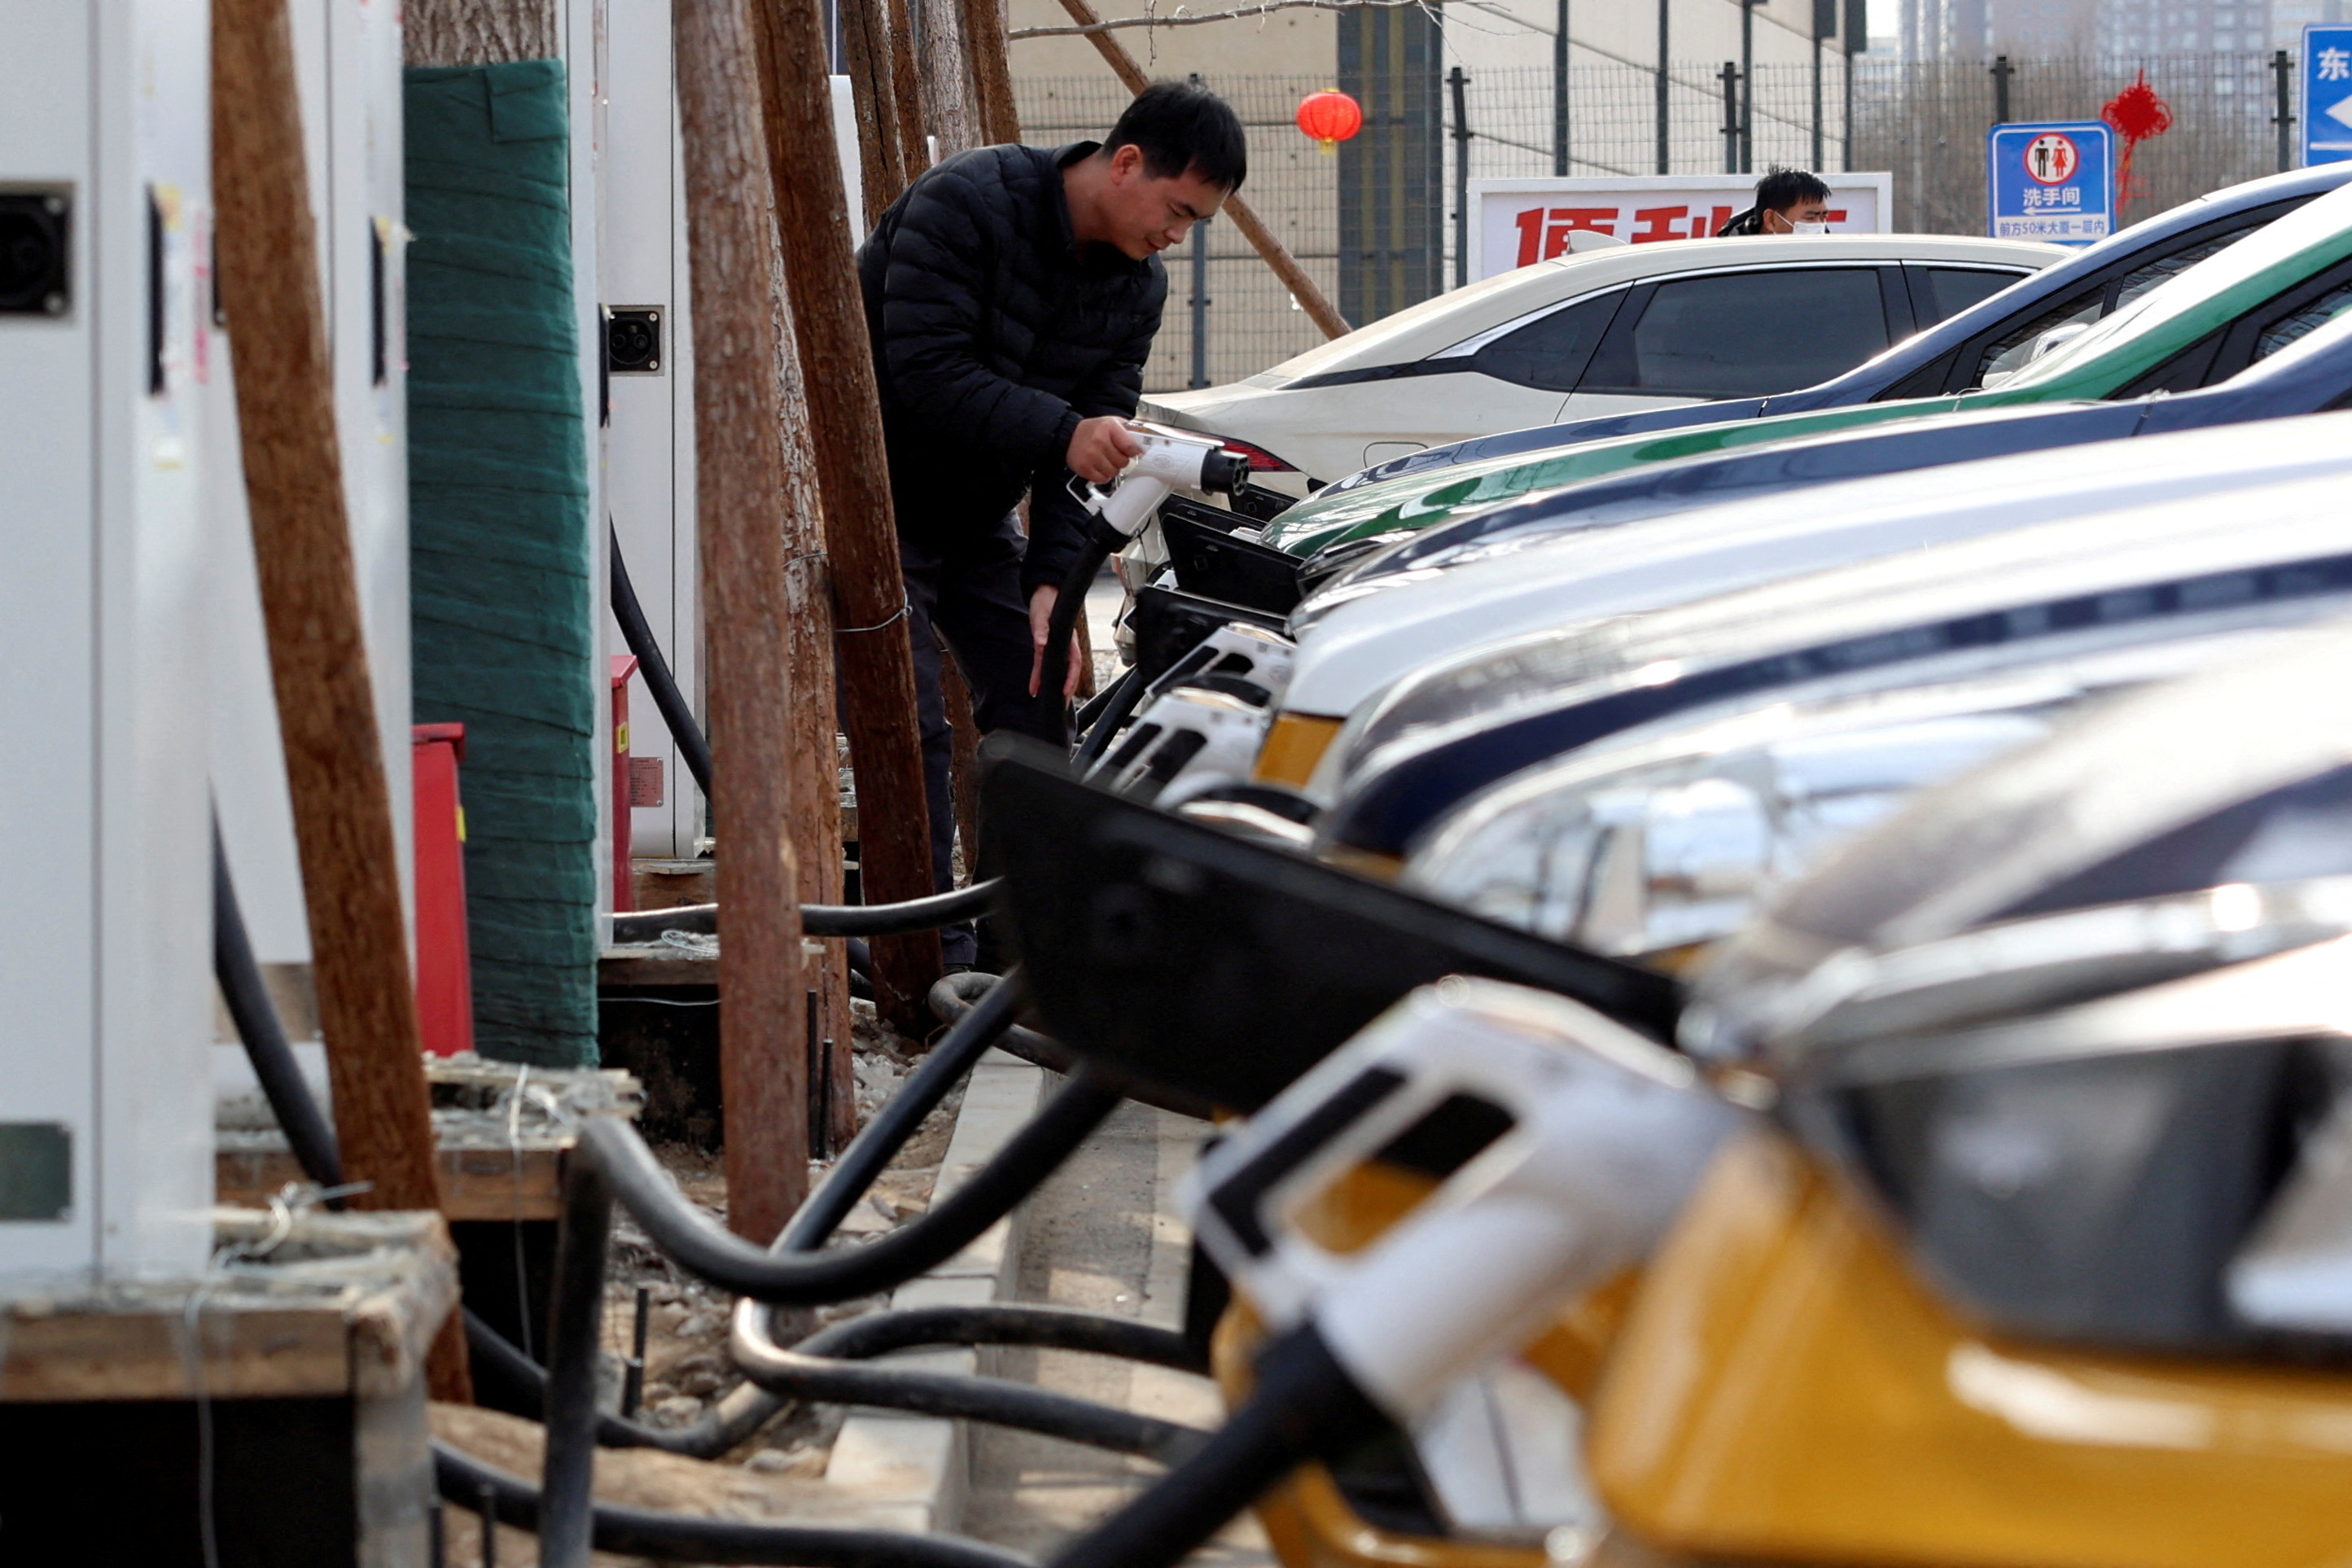 A man charges a car at an EV charging station in Beijing